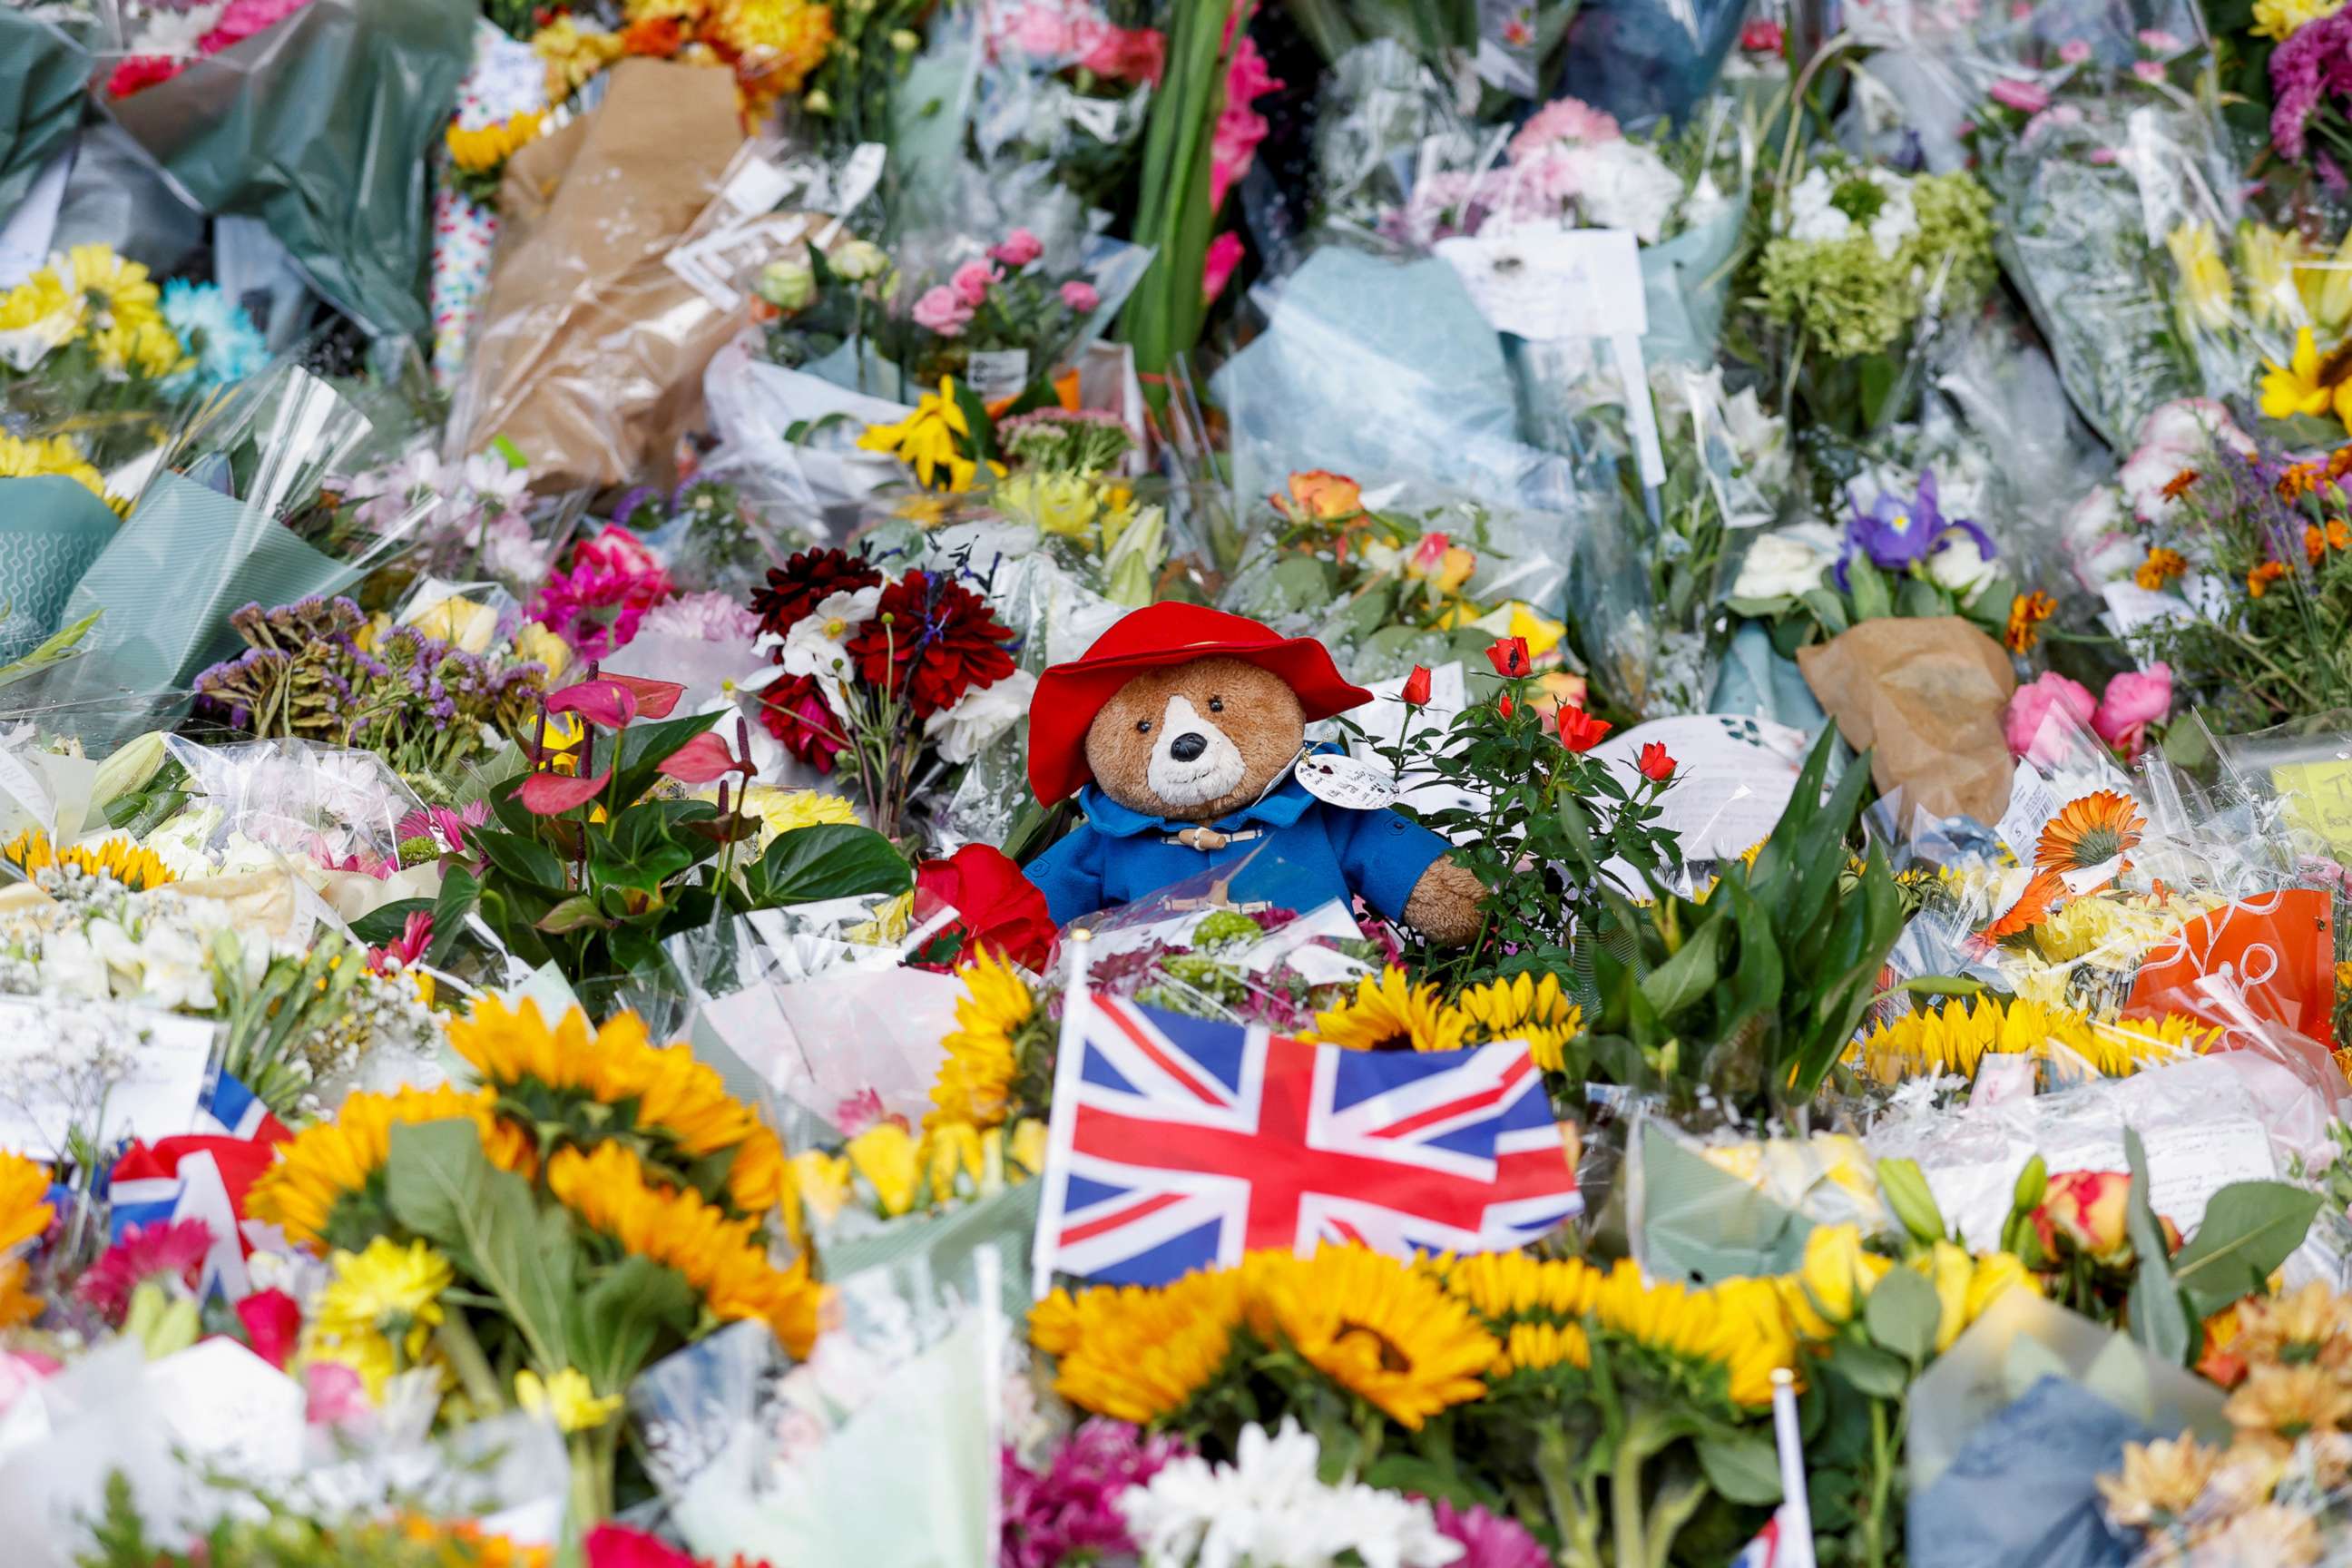 PHOTO: A Paddington Bear toy is placed among floral tributes at the Sandringham Estate, following the death of Britain's Queen Elizabeth, in eastern England, Sept. 13, 2022.